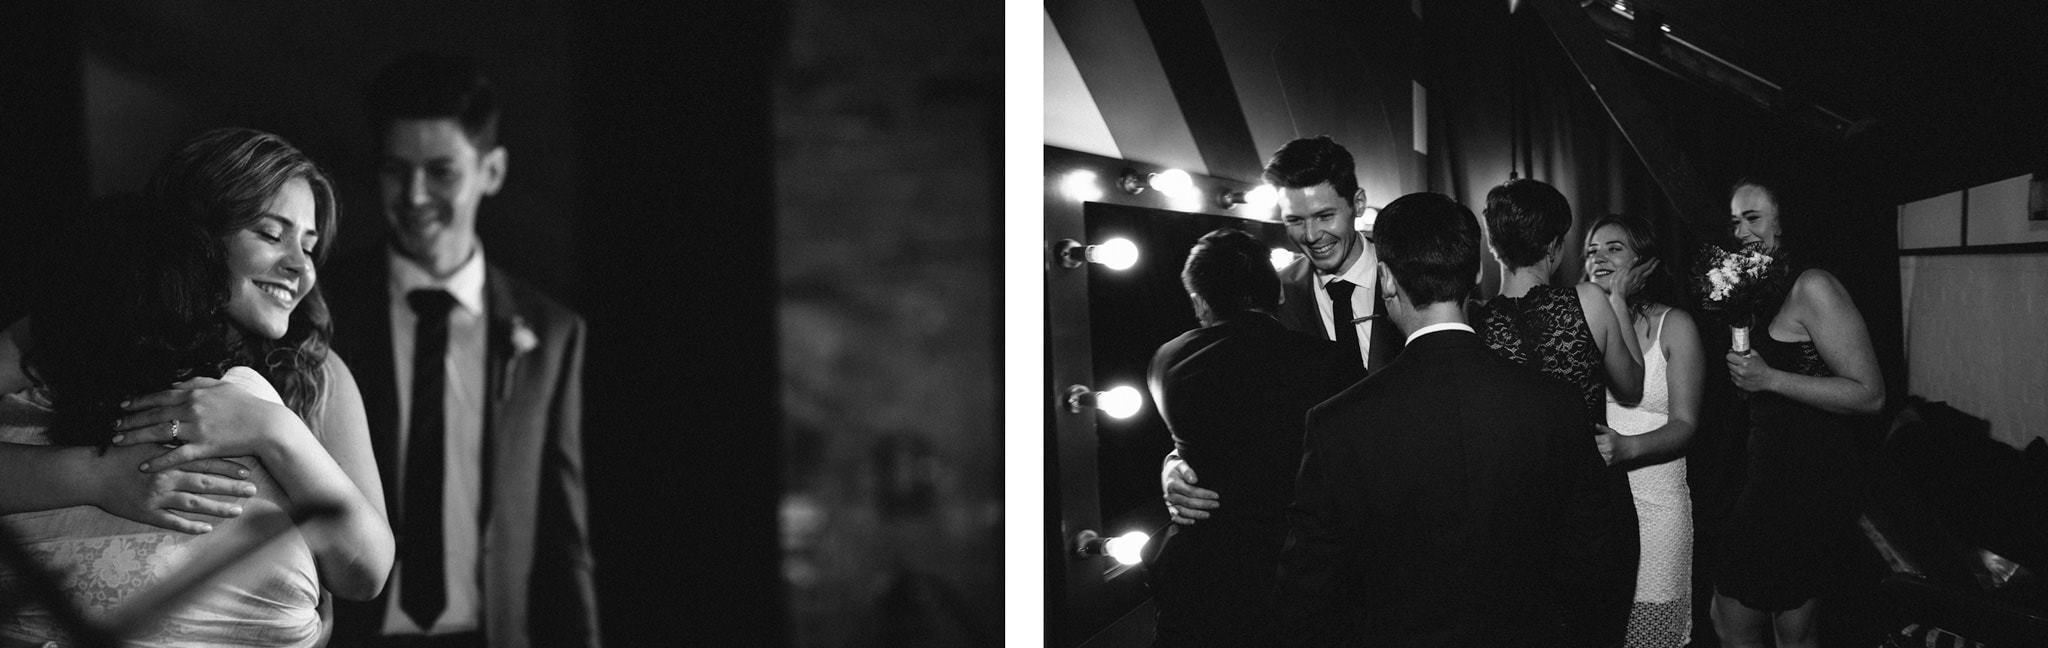 stylish and emotion - wedding photos in melbourne in black and white